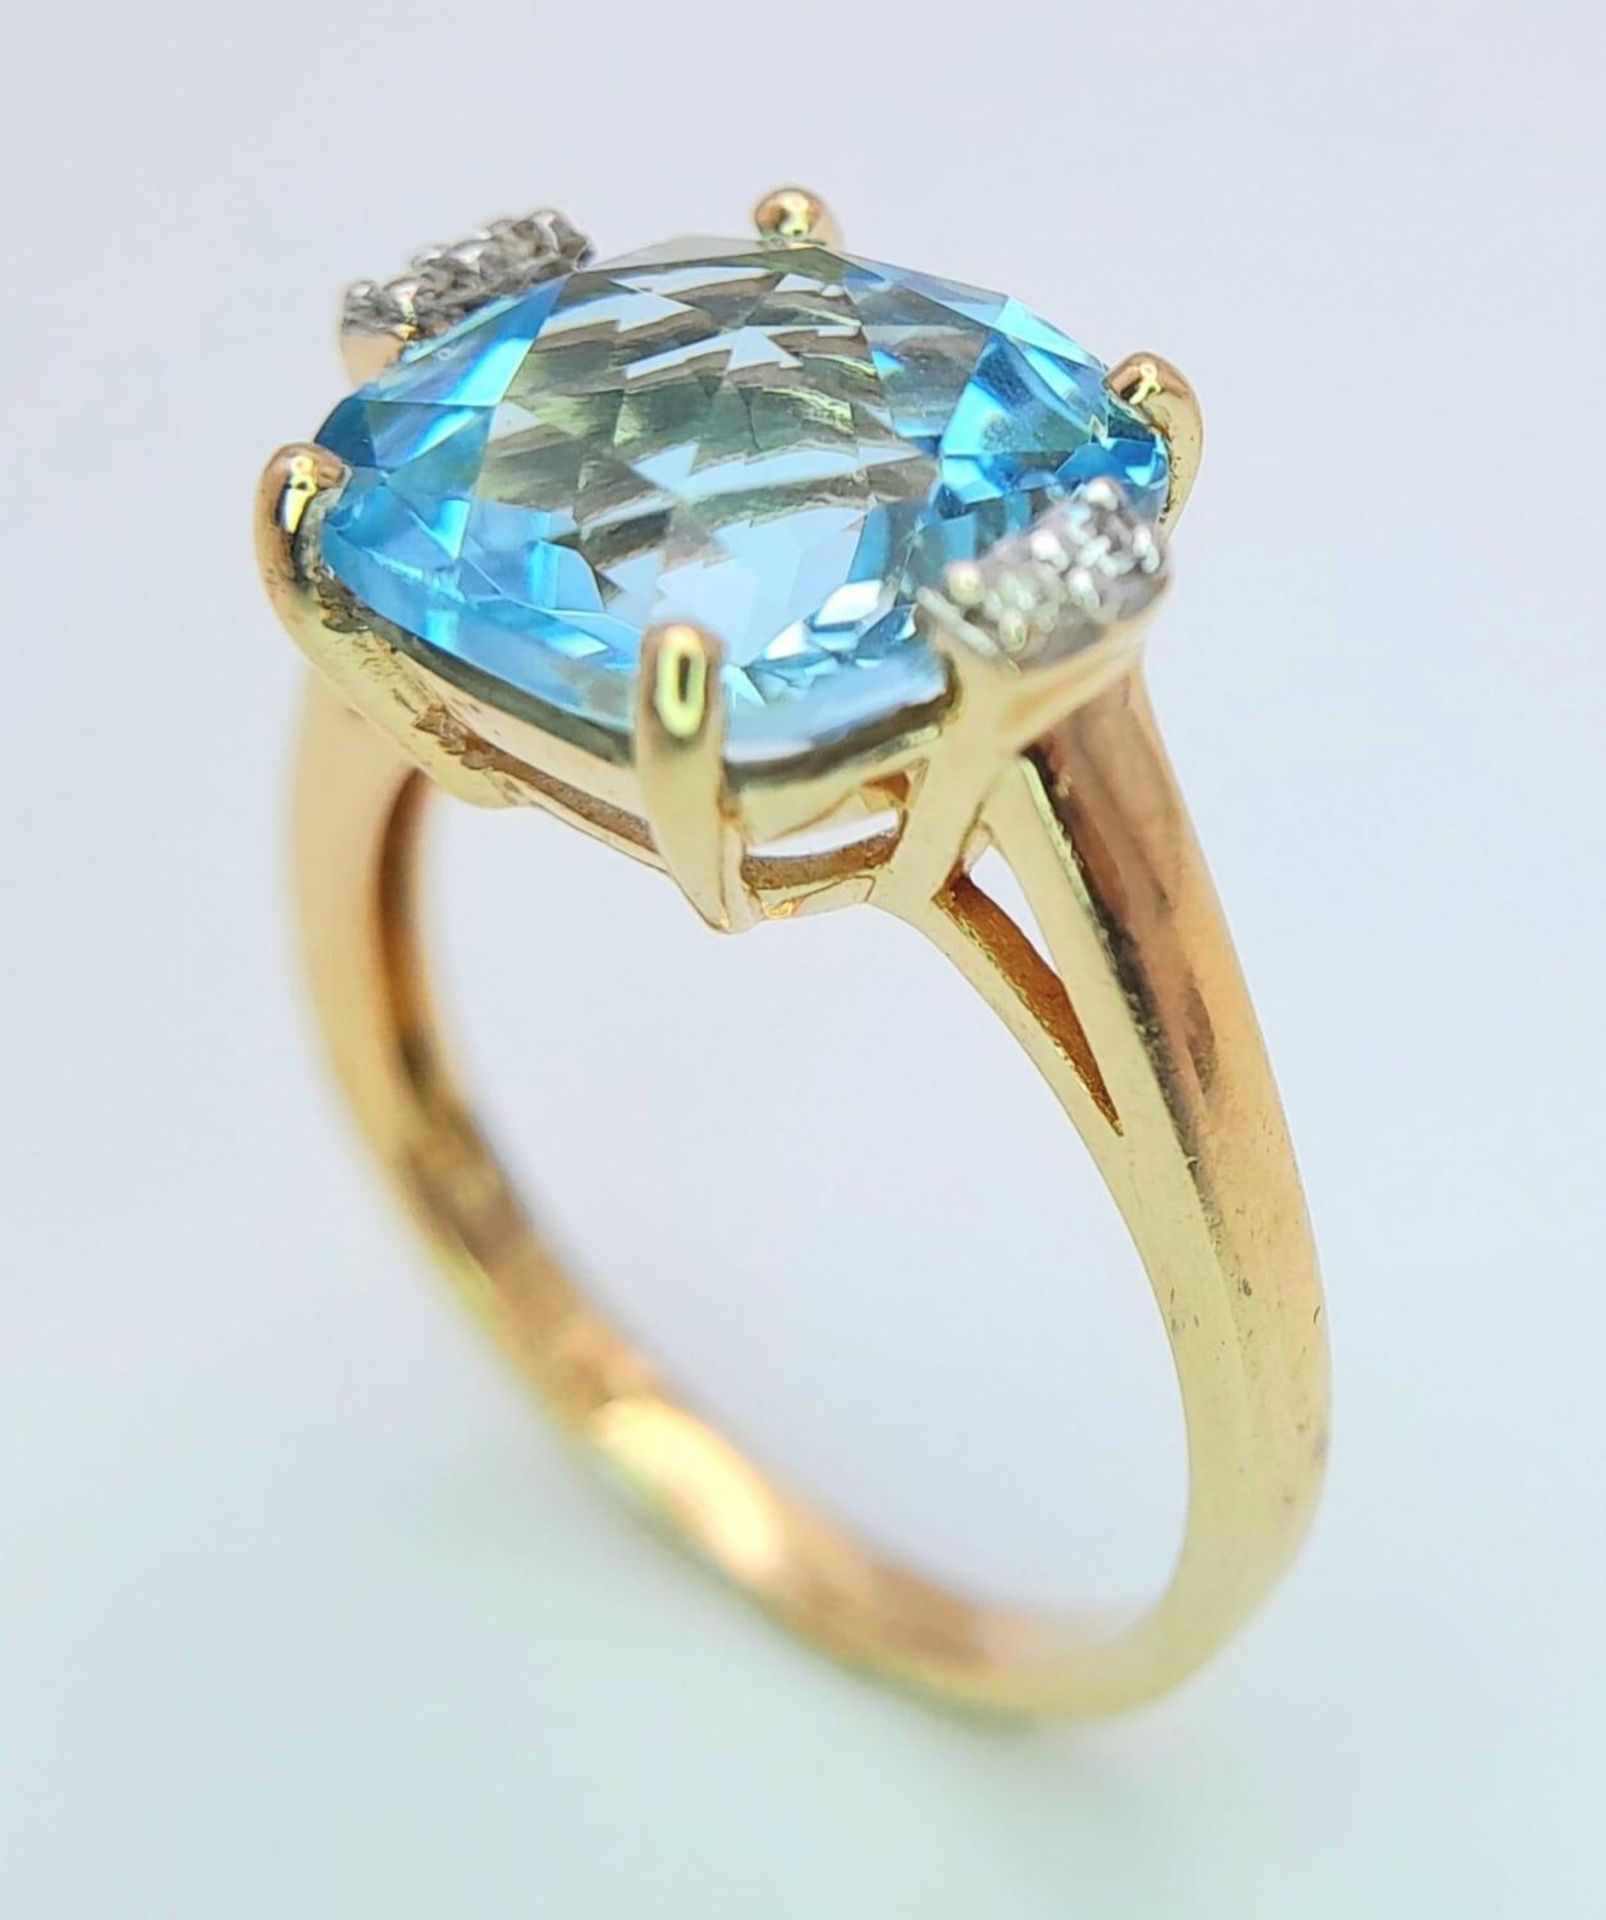 A very attractive 14 K yellow gold ring with a large, cushion cut aquamarine and a pair of - Image 9 of 14